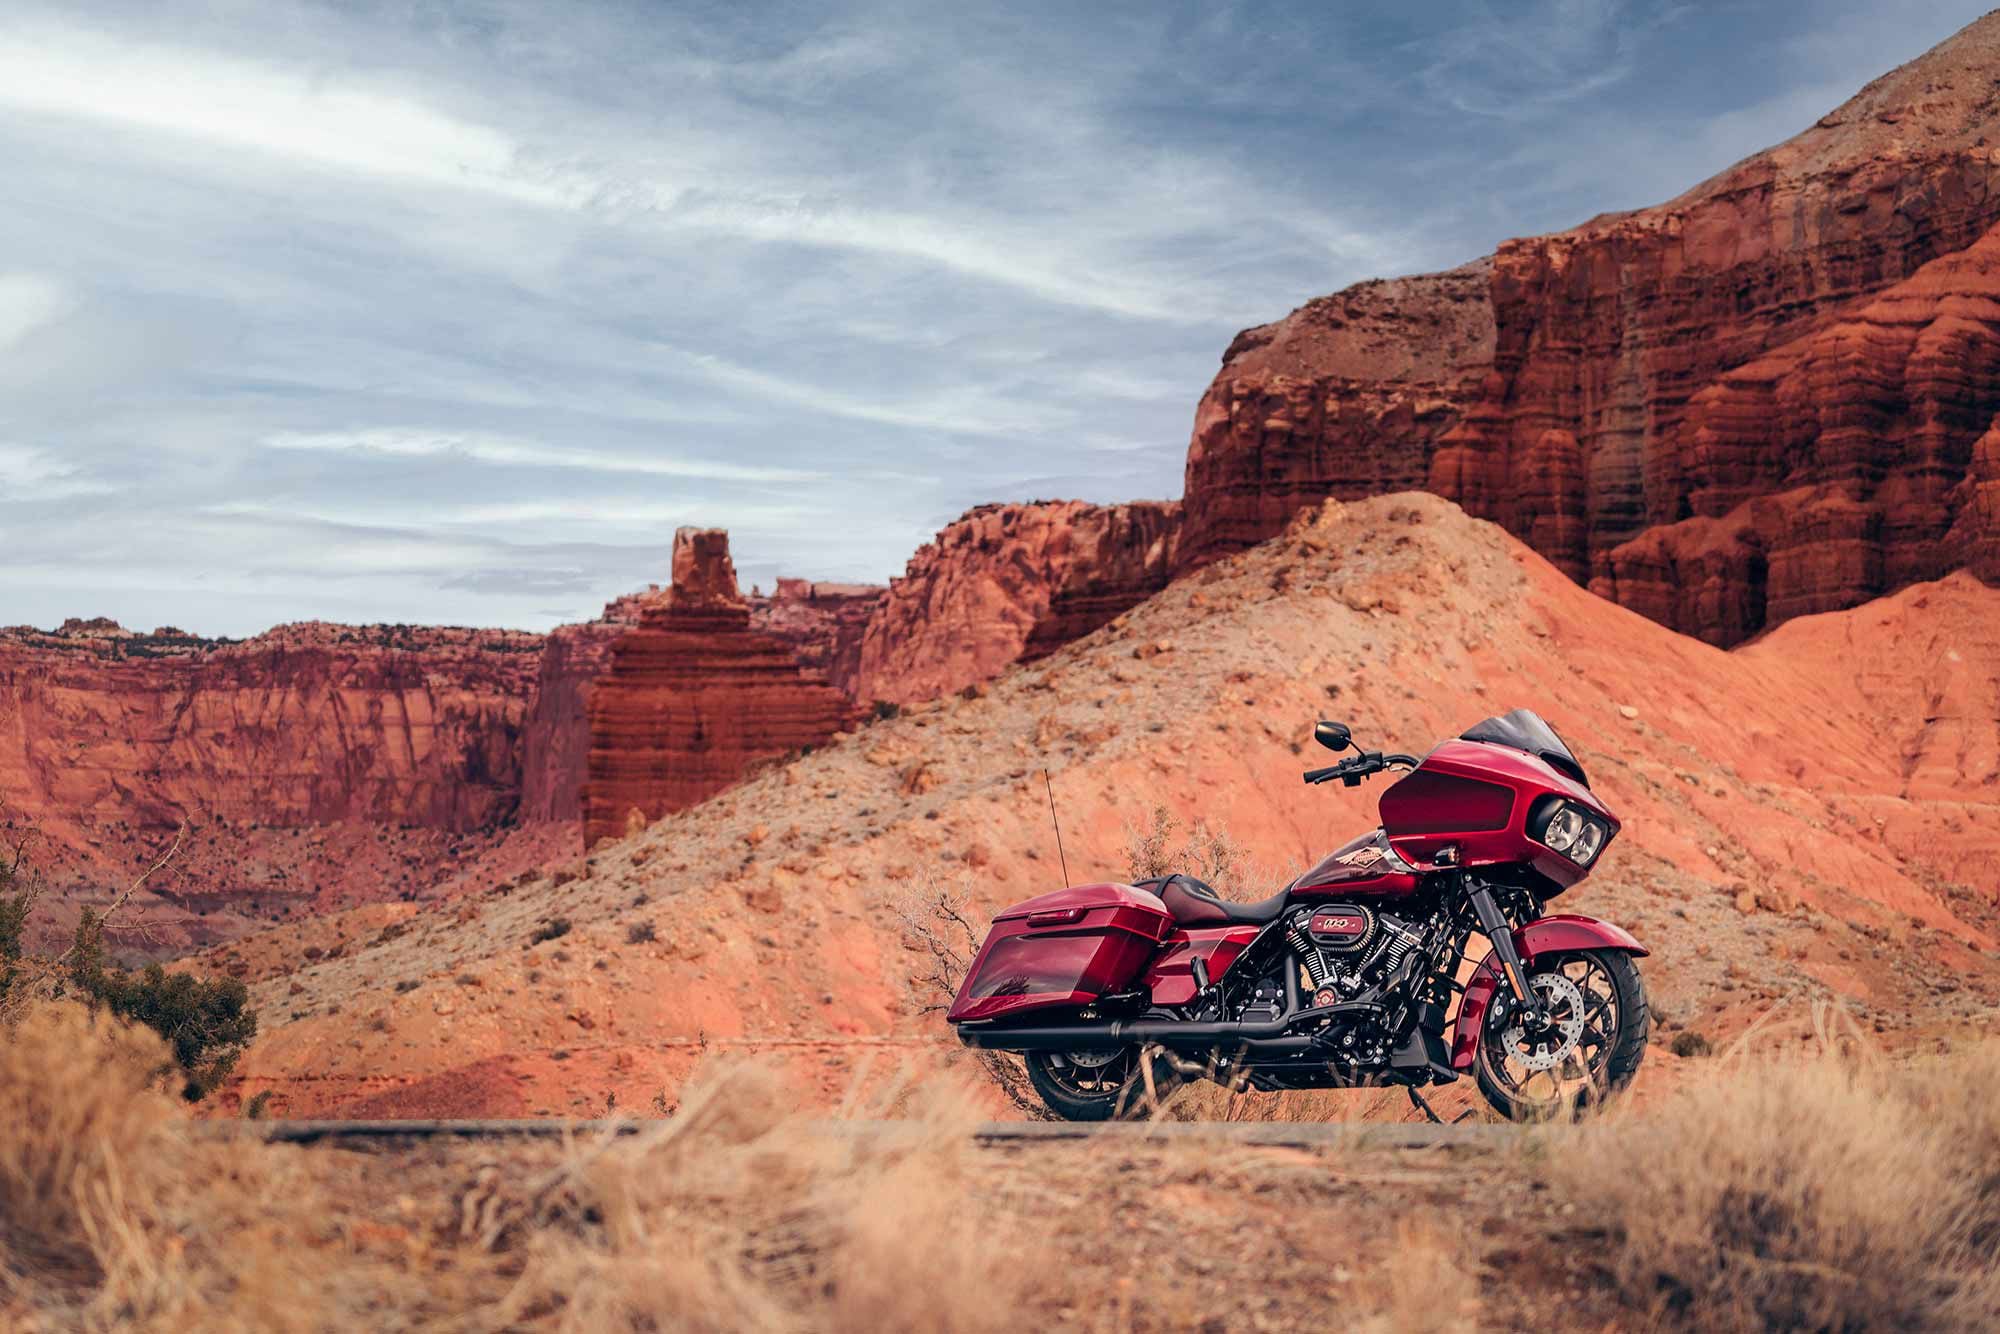 2023 Harley-Davidson Road Glide Special Anniversary edition, limited to 1,600 units worldwide.